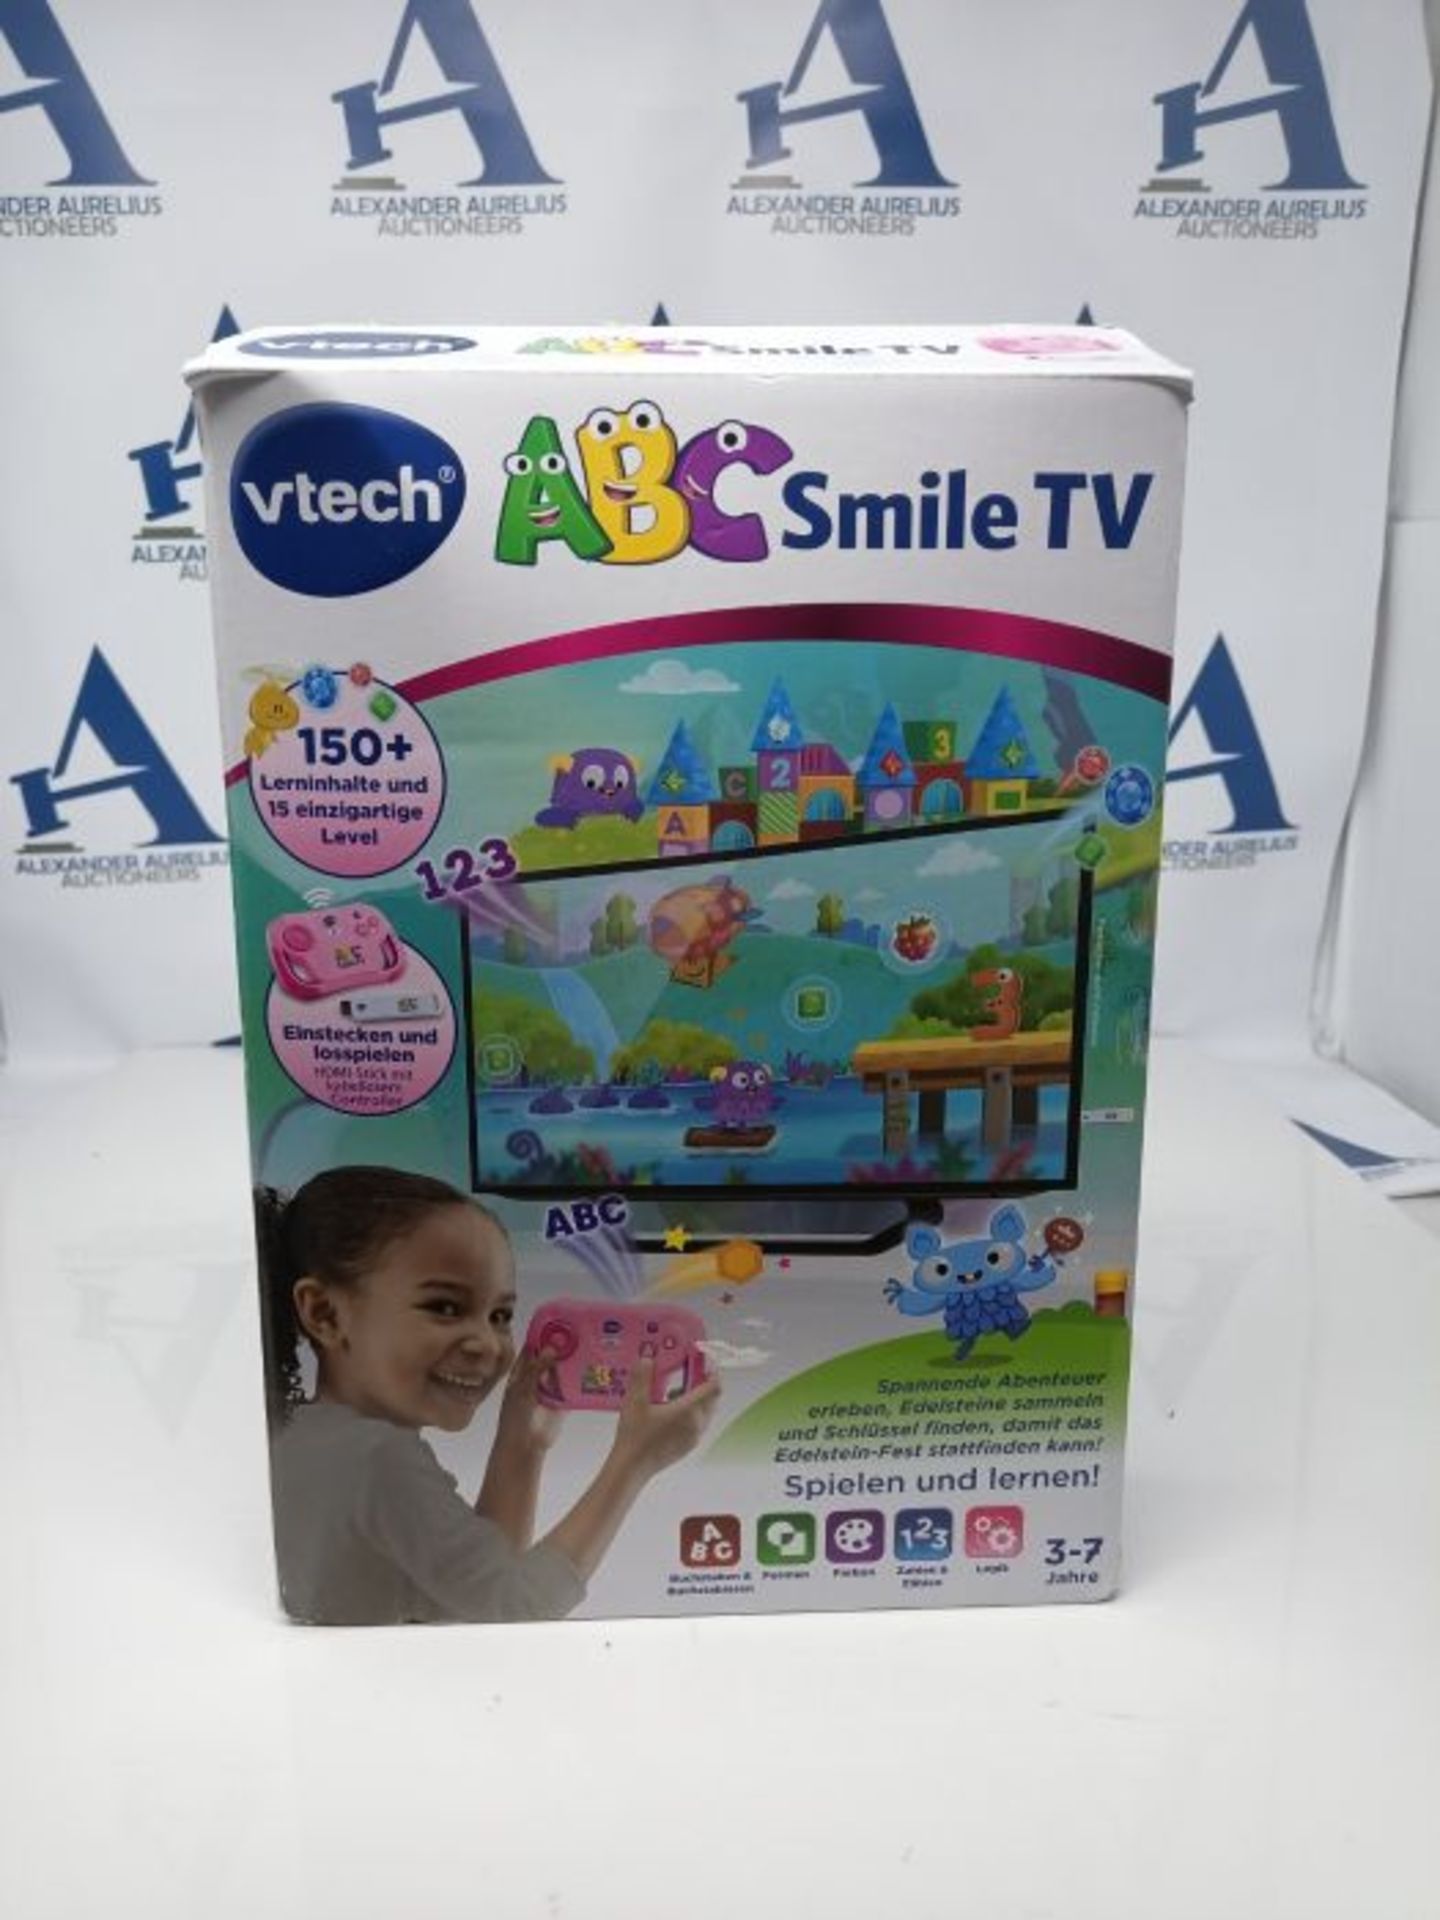 VTech 80-613254 ABC Smile TV pink Game Console - Image 2 of 3